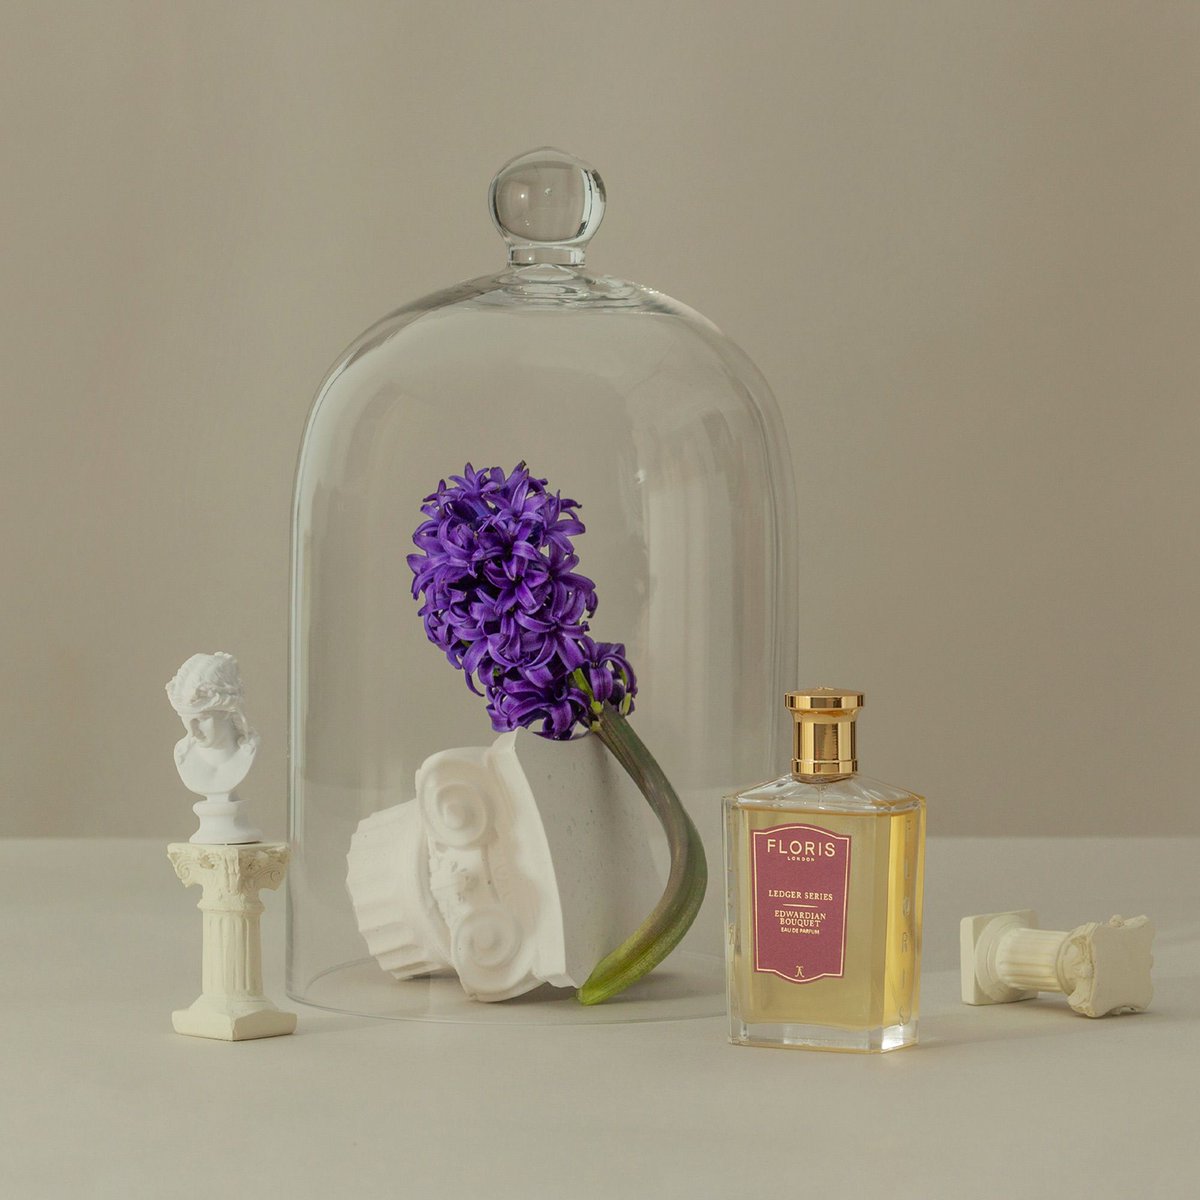 Edwardian Bouquet was first introduced into the range in 1901 as a celebration of the new Edwardian era, reflecting the decadent values of the time. The fragrance was then reintroduced in 1984 with the rediscovery of the original formula while going through the family archives.